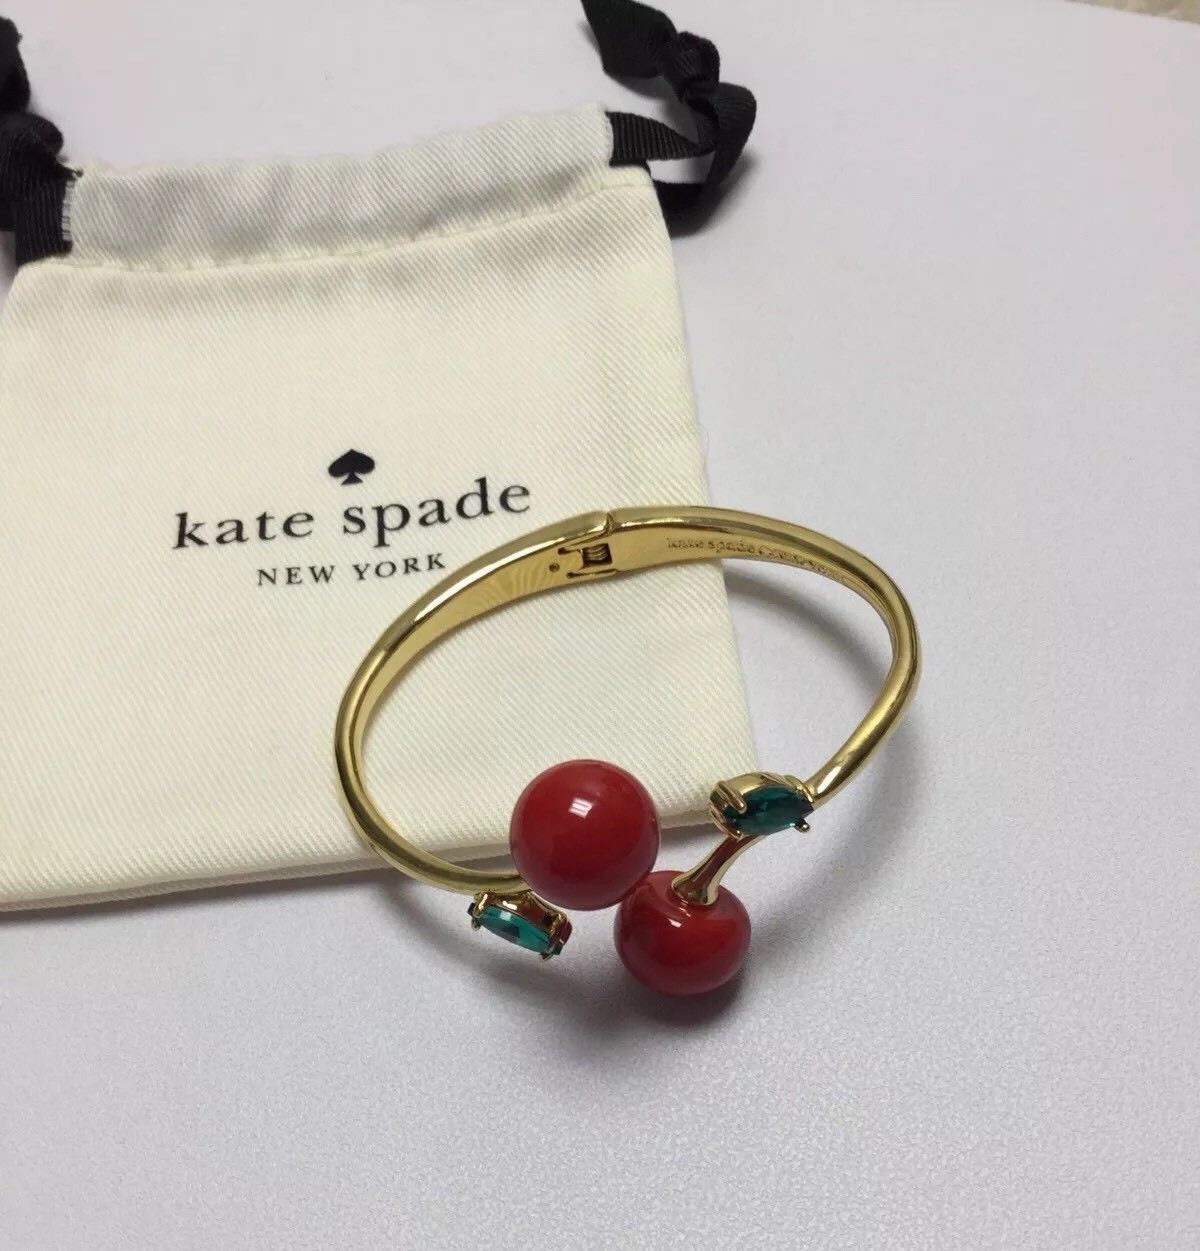 Primary image for Kate Spade ma cherie cherry open hinged cuff Bracelet With KS Dust Bag New